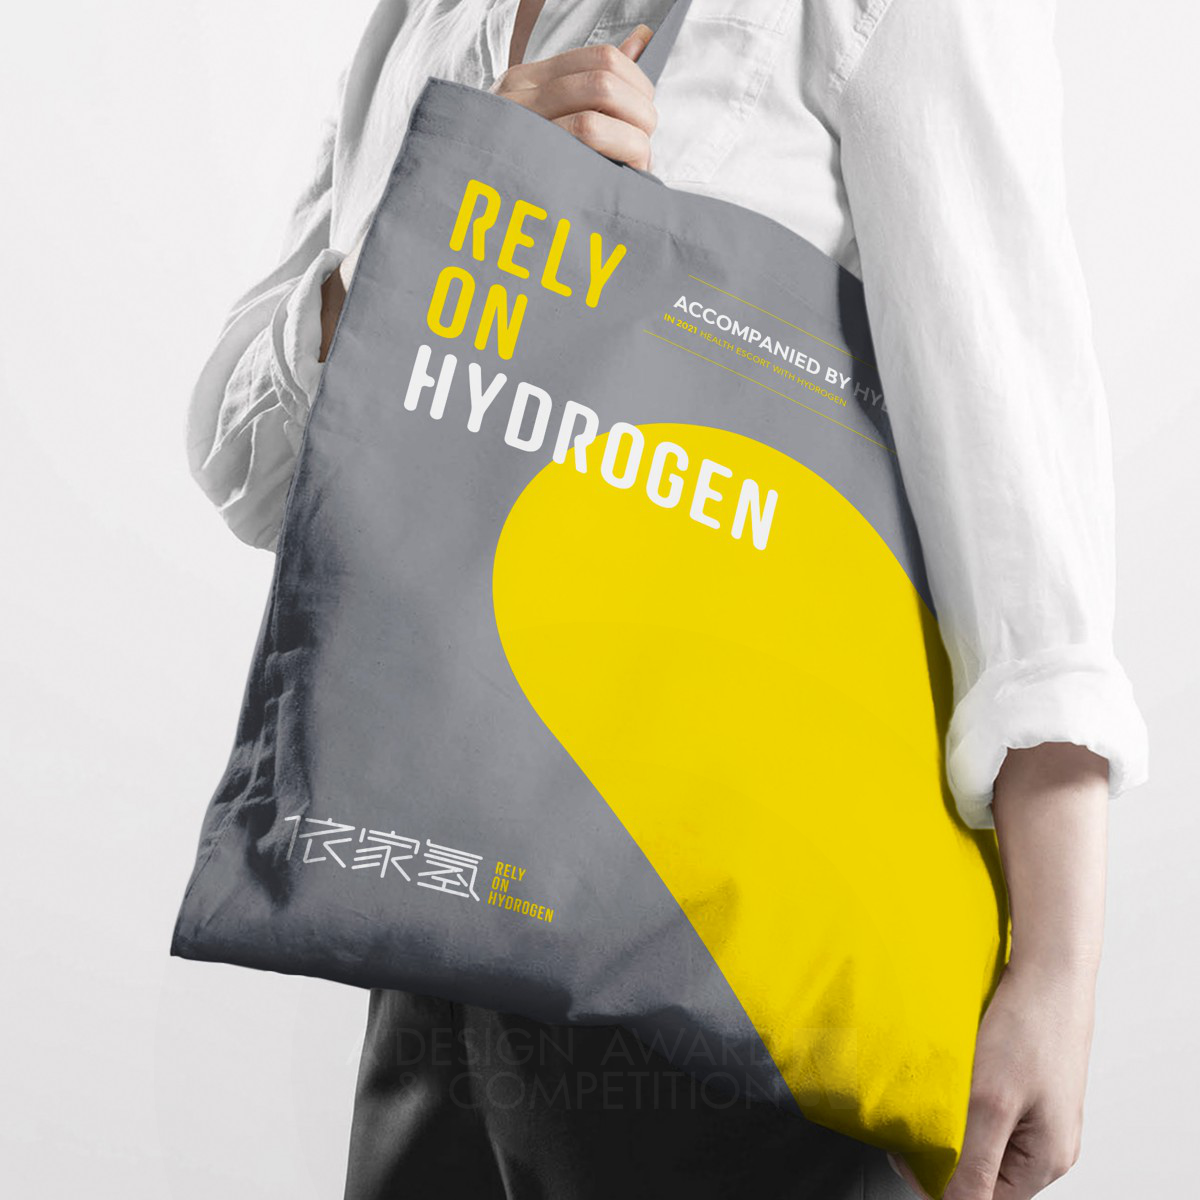 Rely on Hydrogen Corporate Identity by Guangzhou Cheung Ying Design Co   Ltd 